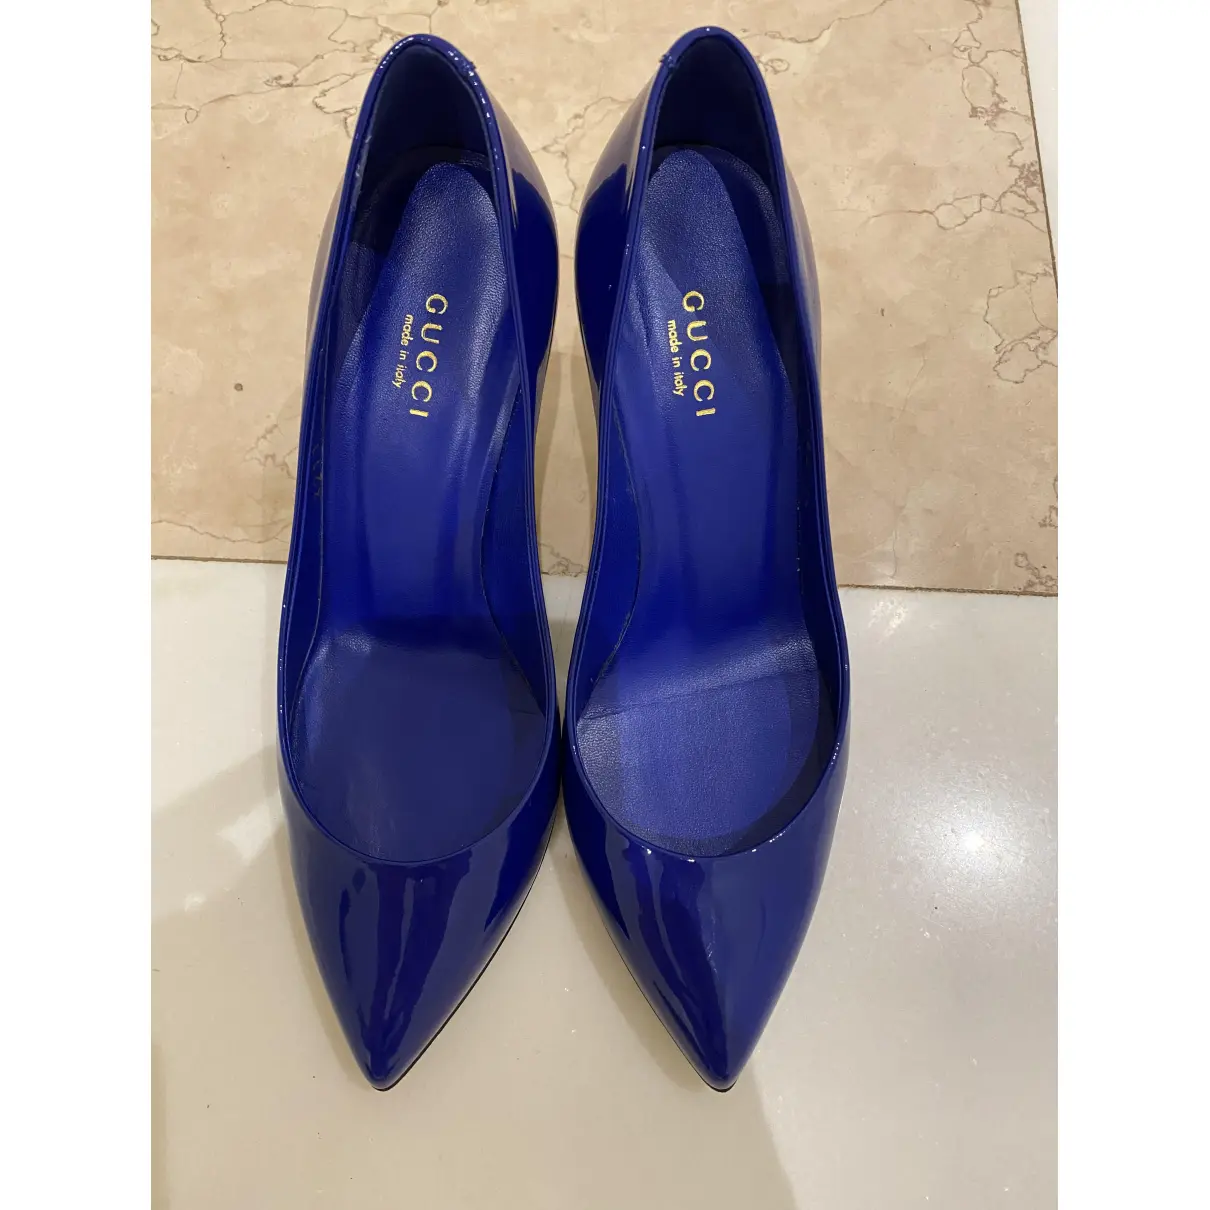 Buy Gucci Leather heels online